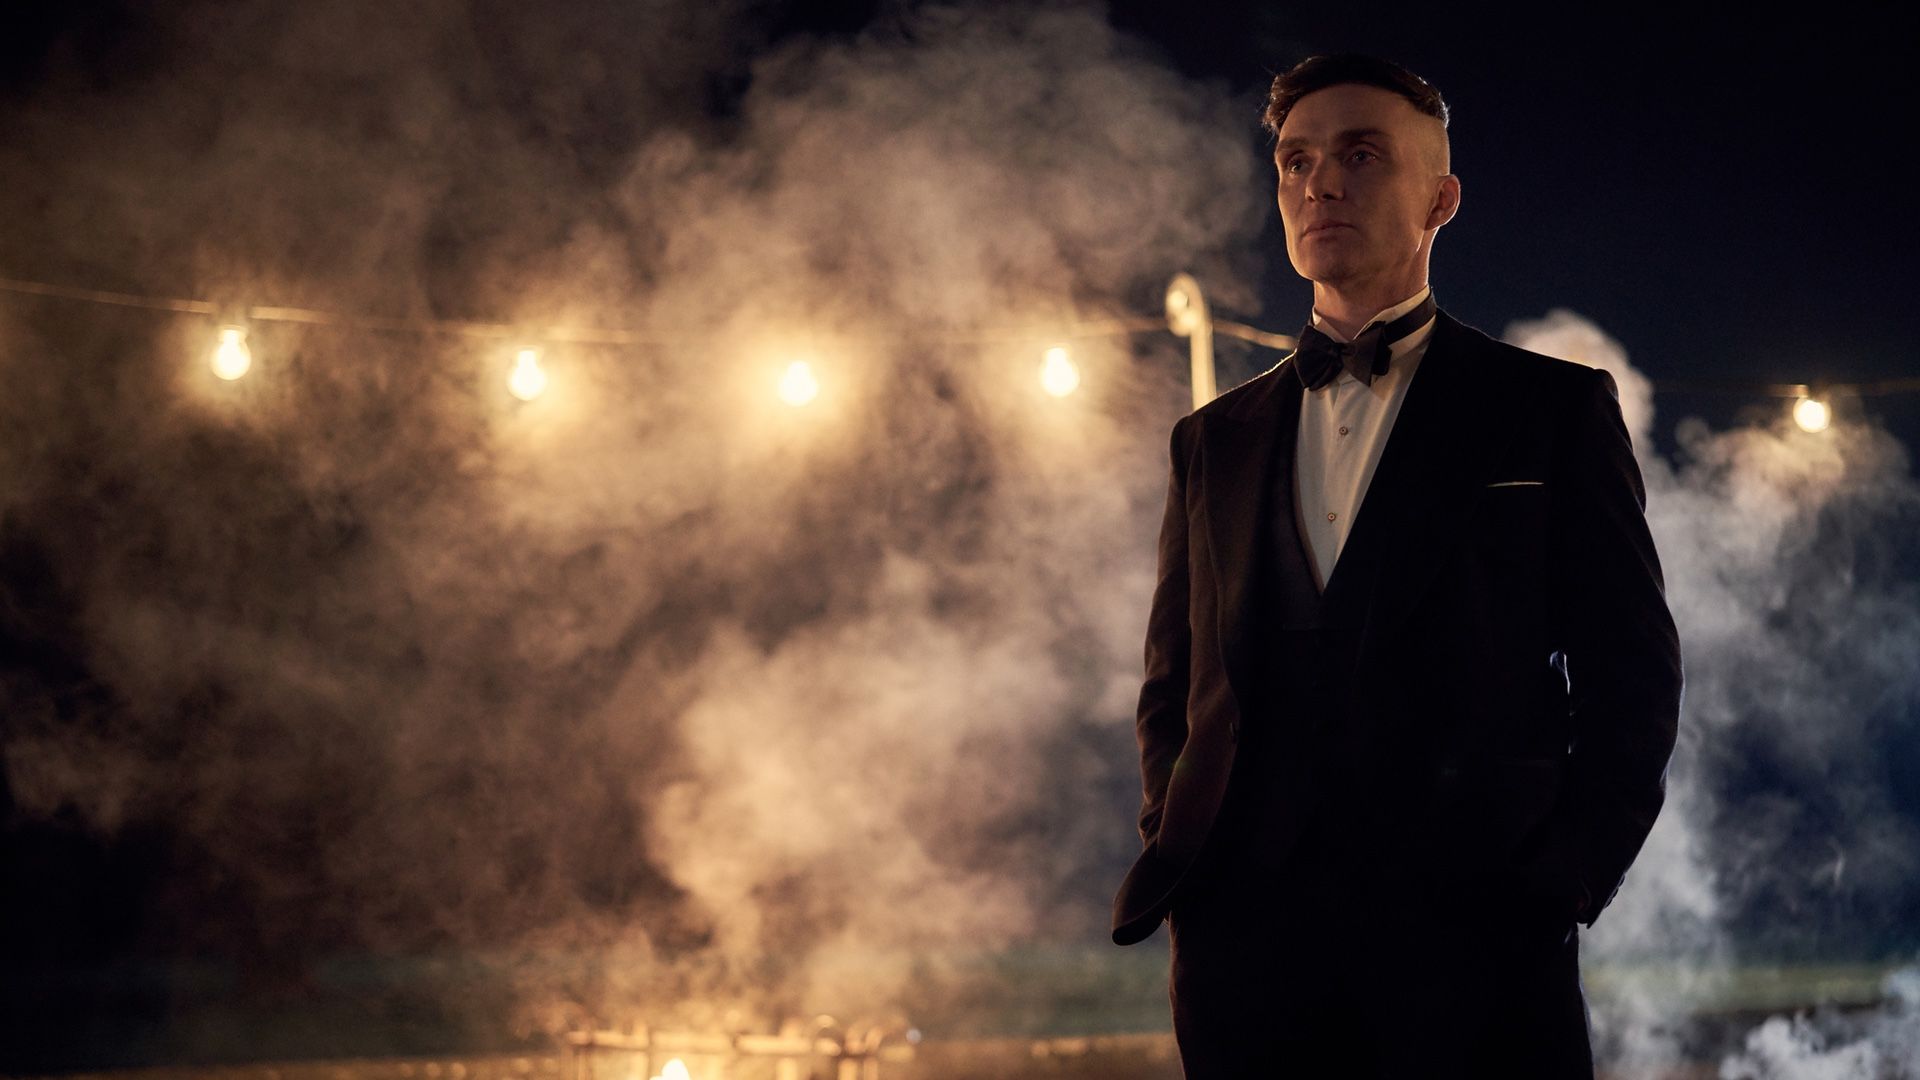 The Long Awaited Fifth Season Of Netflix's PEAKY BLINDERS Gets A Premiere Date!